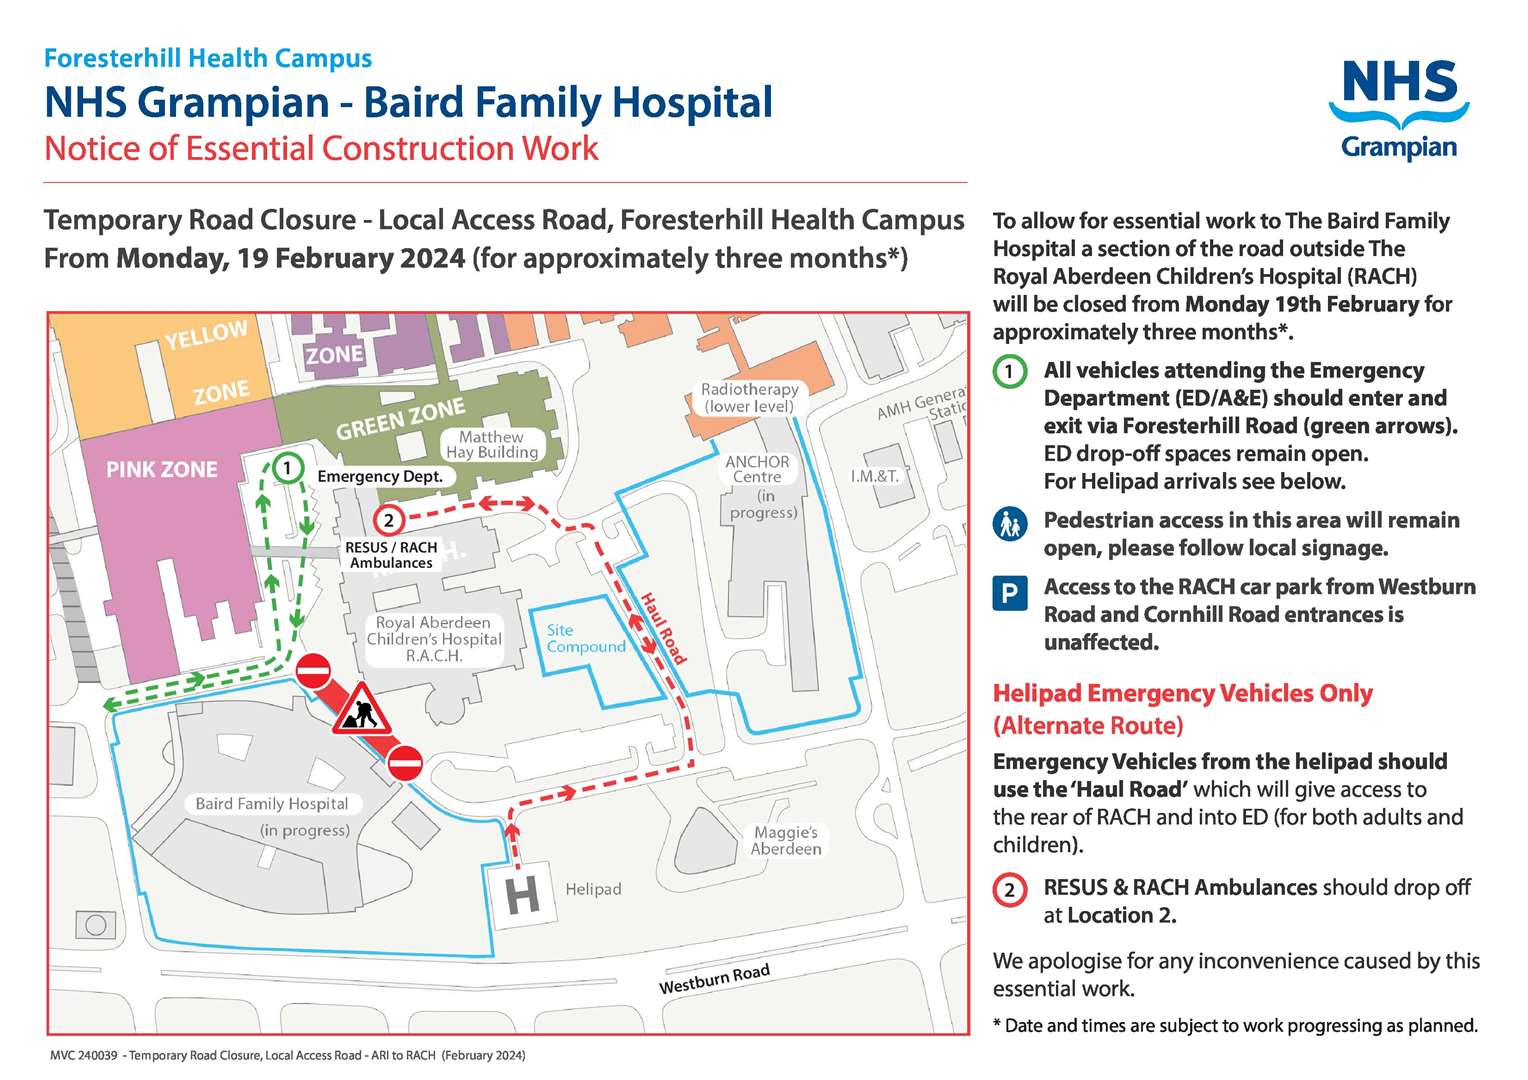 The road outside Royal Aberdeen Children's Hospital will be closed for three months.